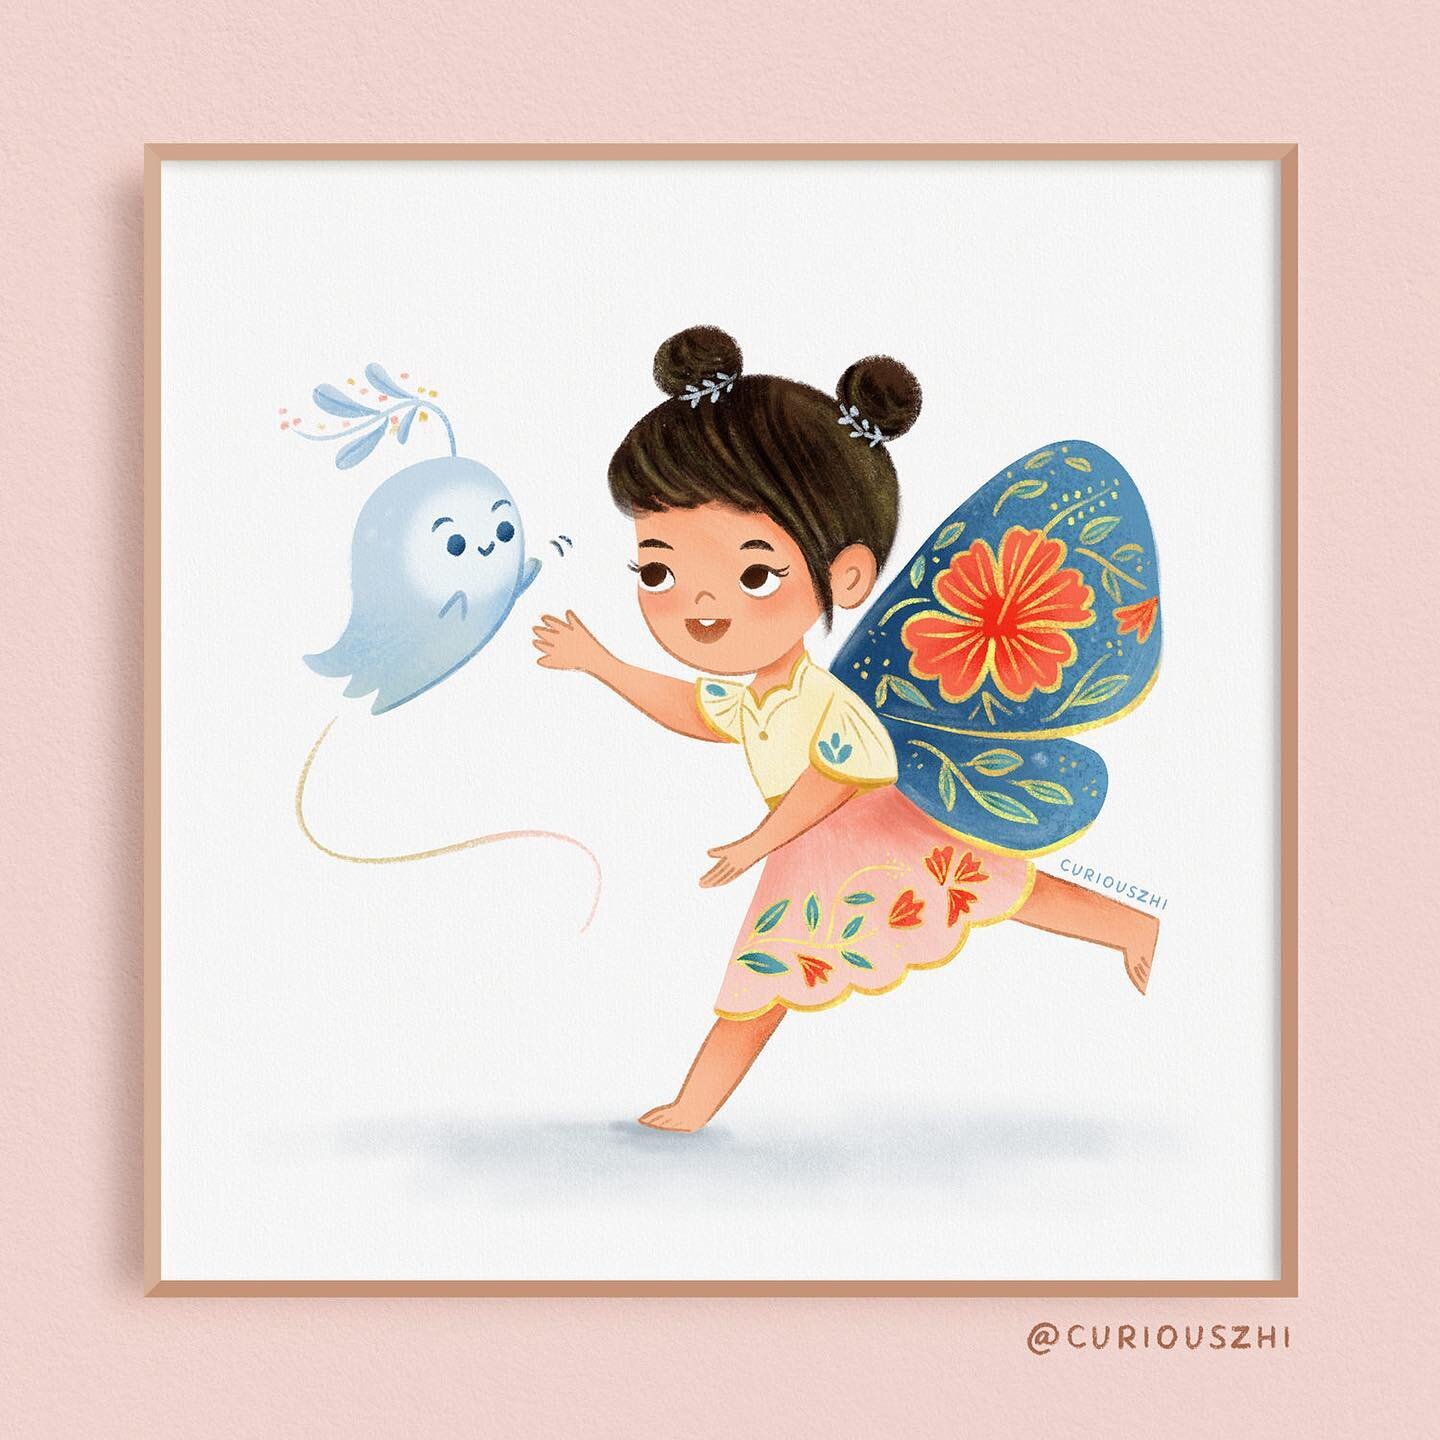 A closer view of my fairy illustration for @skillshare&rsquo;s celebration of Asian &amp; Pacific Islander Heritage Month this May. Take a peek at the previous video for a little insight into the inspiration behind this piece.
⠀
Thank you Skillshare 